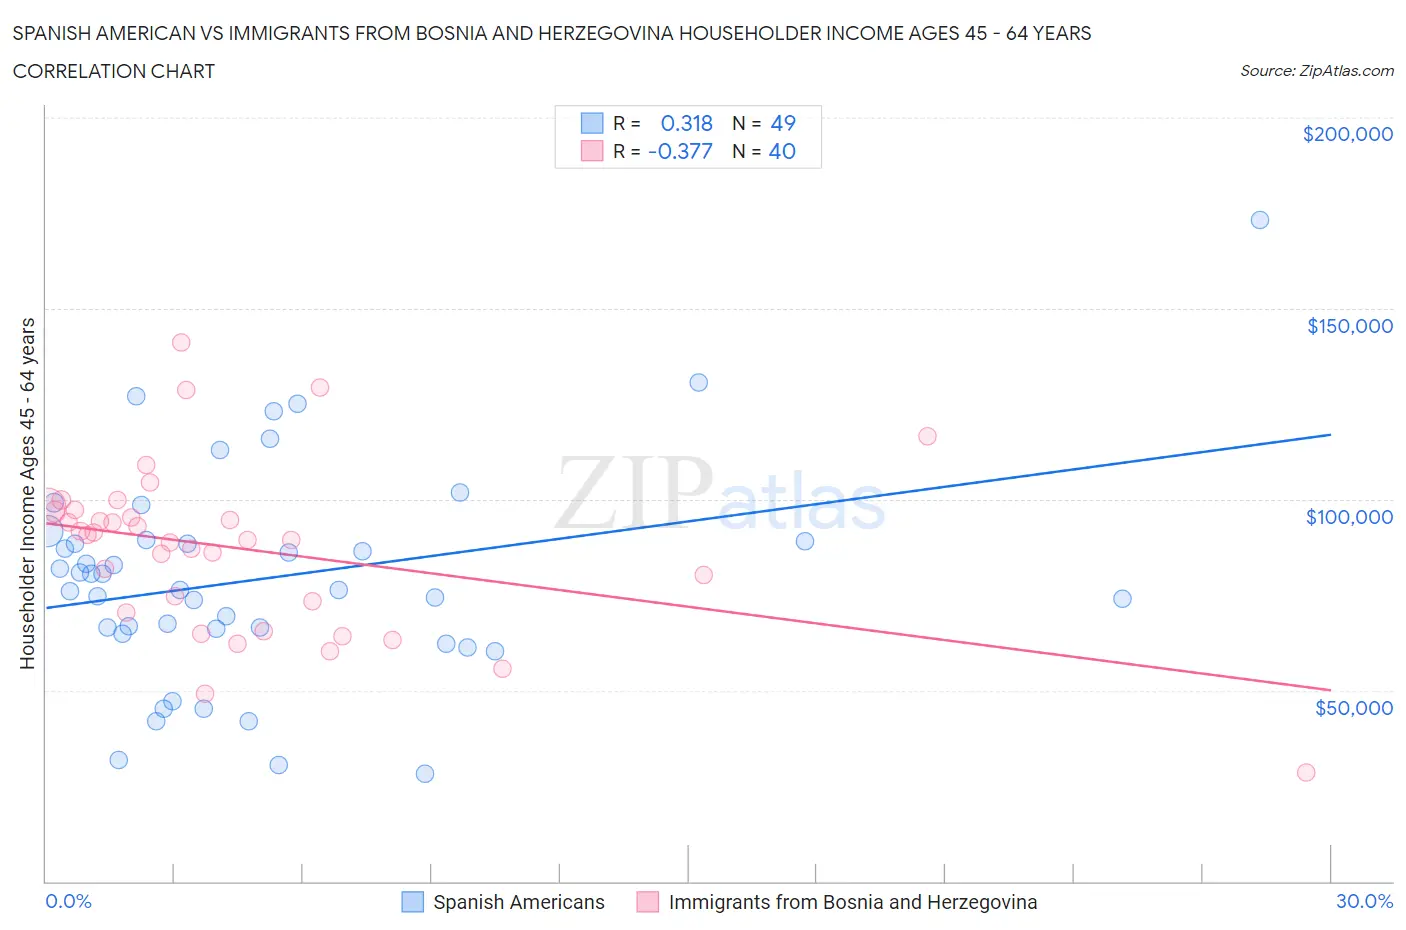 Spanish American vs Immigrants from Bosnia and Herzegovina Householder Income Ages 45 - 64 years